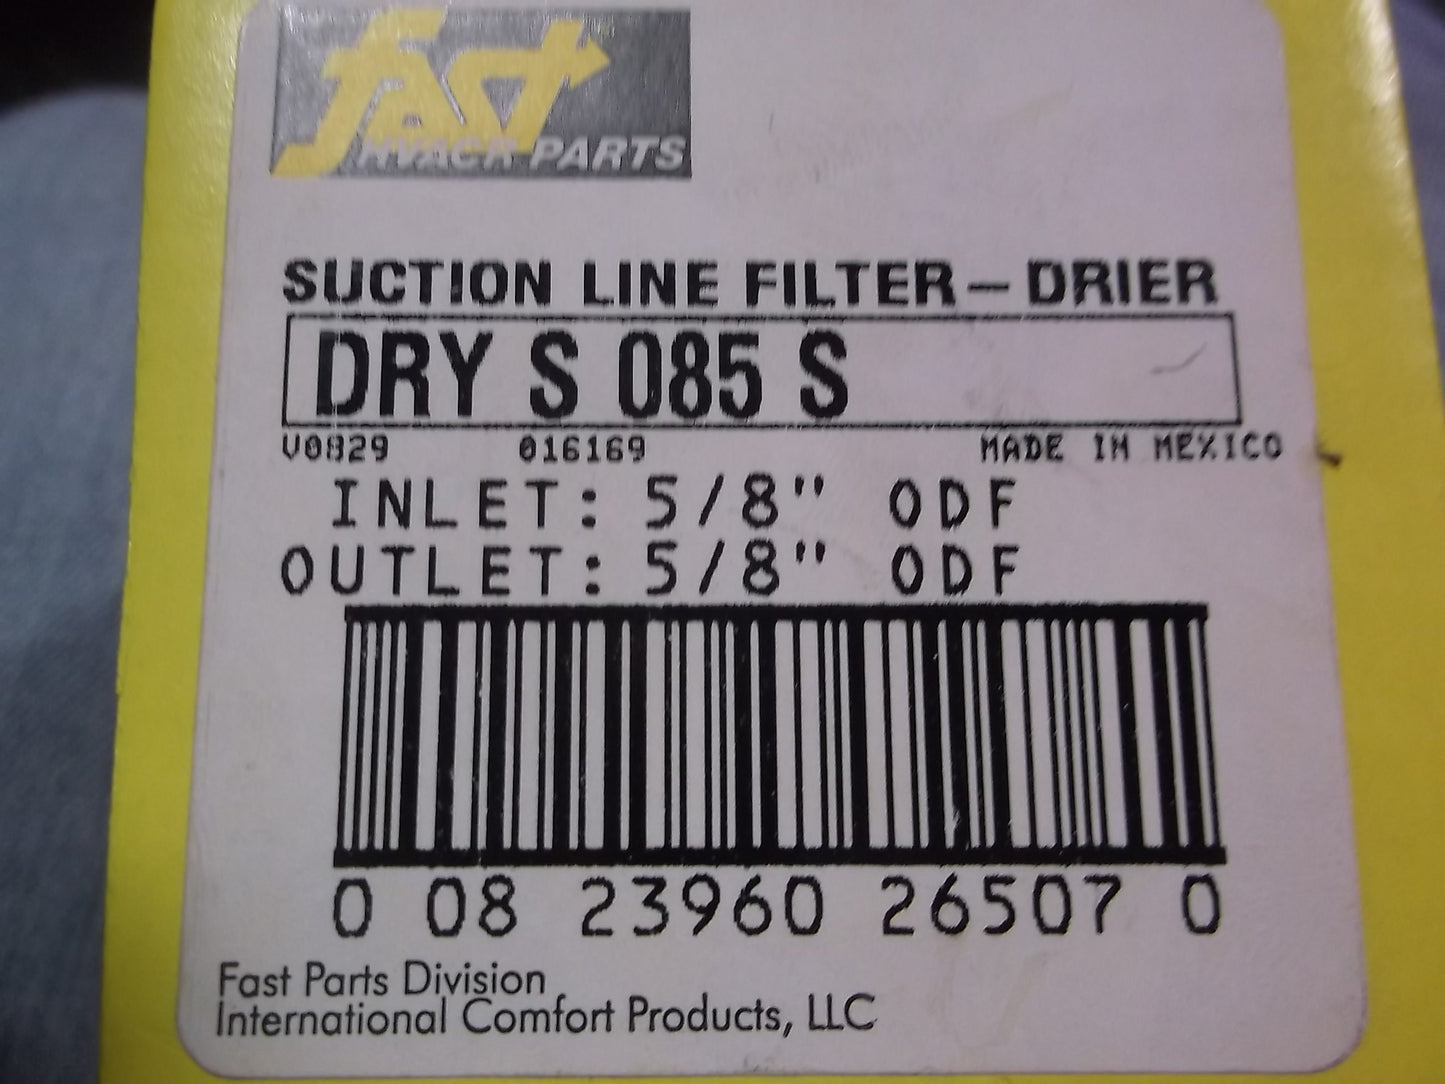 8 CUBIC INCH 5/8" SWEAT SUCTION LINE FILTER DRIER